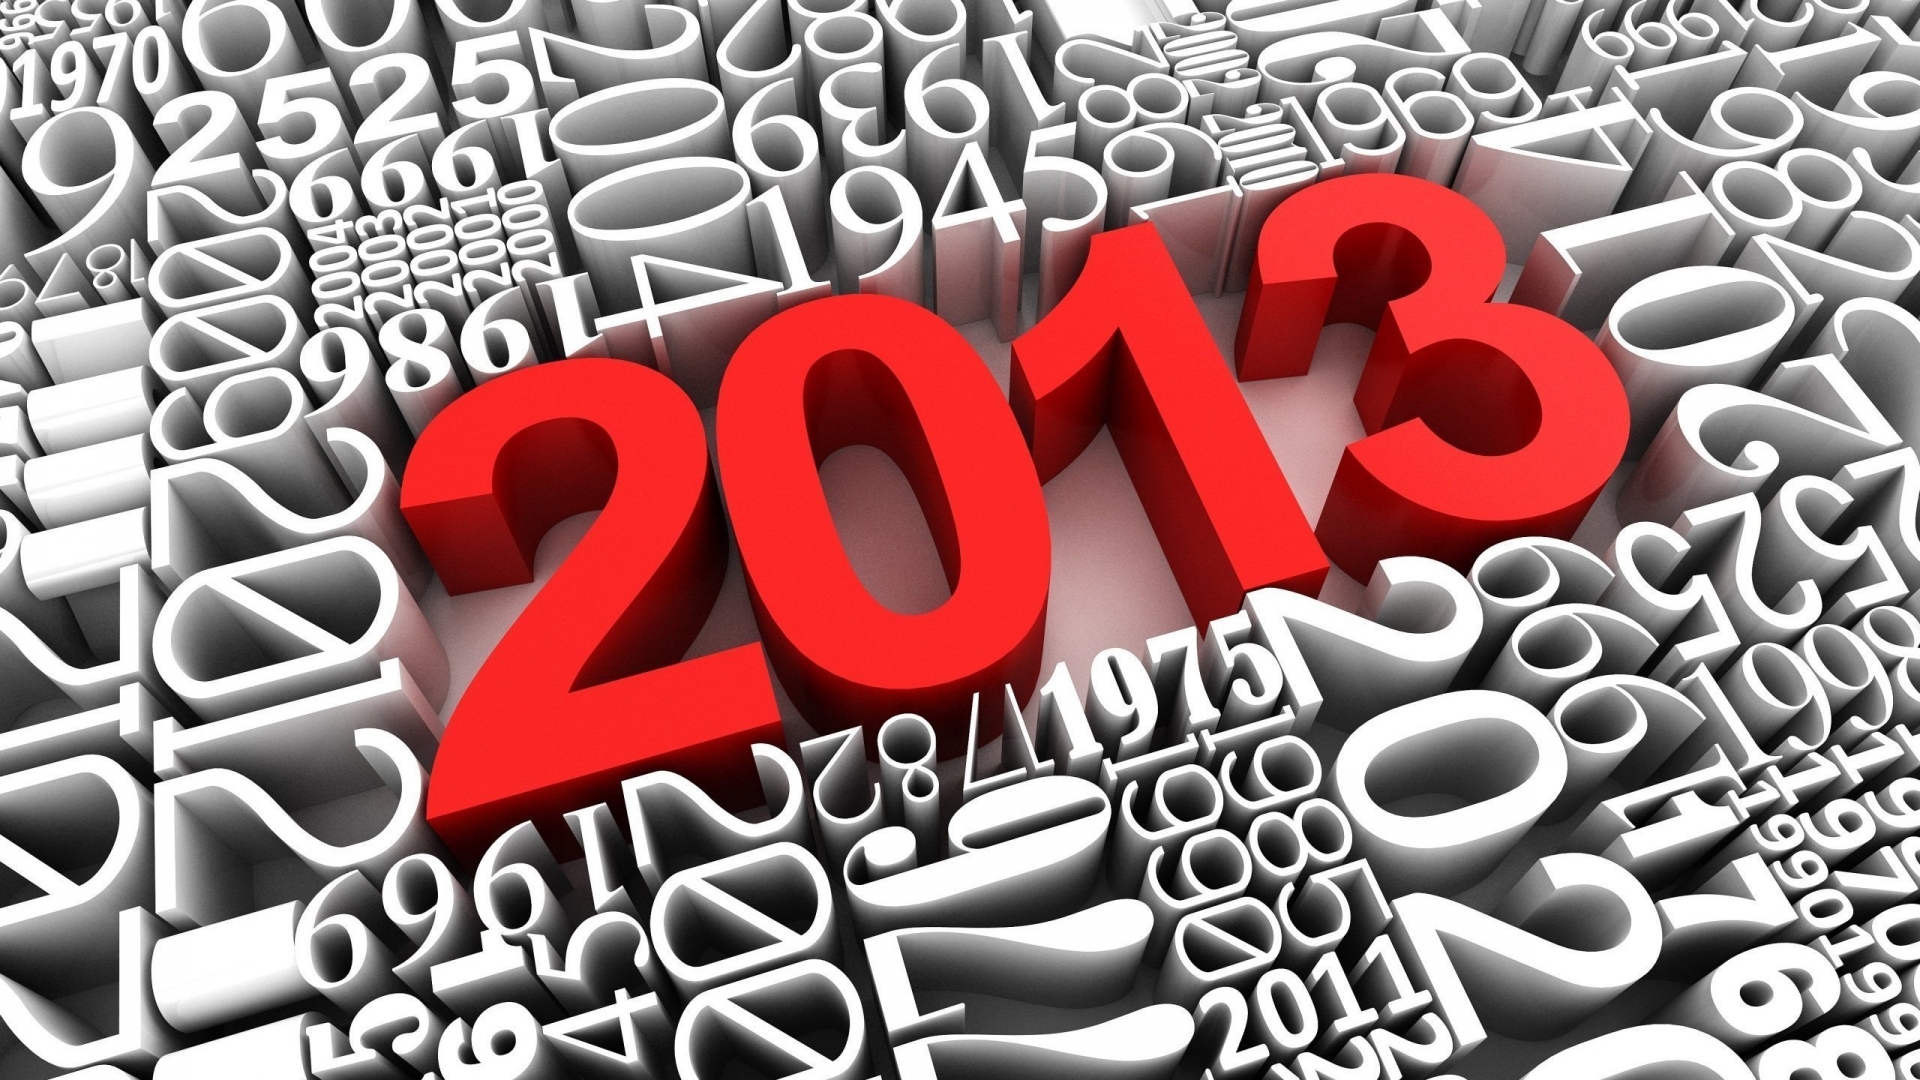 2013 New Year 3D for 1920 x 1080 HDTV 1080p resolution